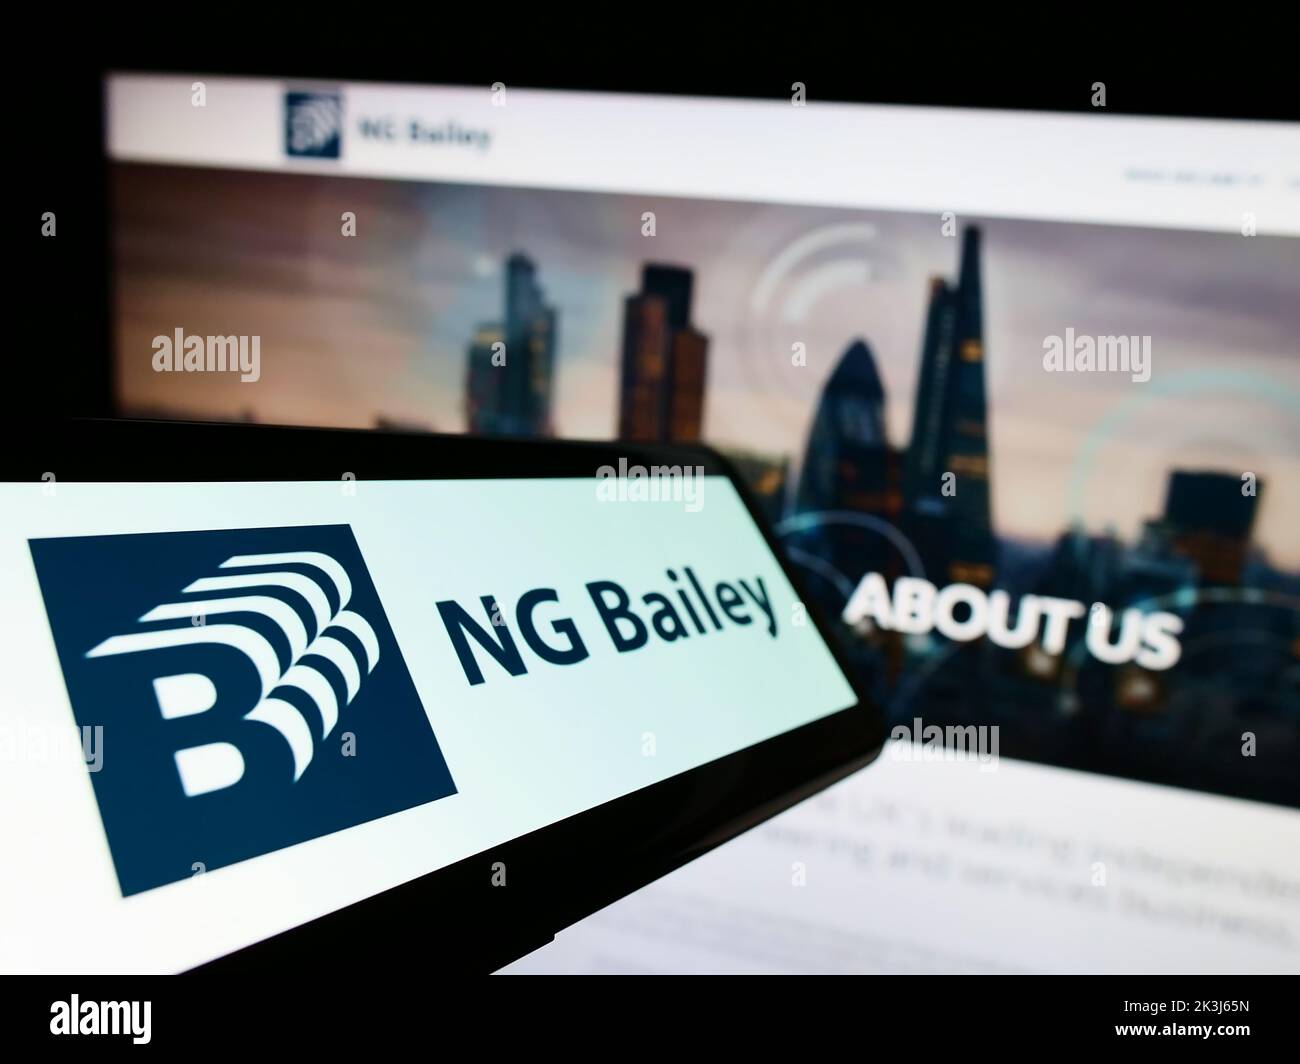 Smartphone with logo of engineering company NG Bailey Group Limited on screen in front of business website. Focus on center-left of phone display. Stock Photo